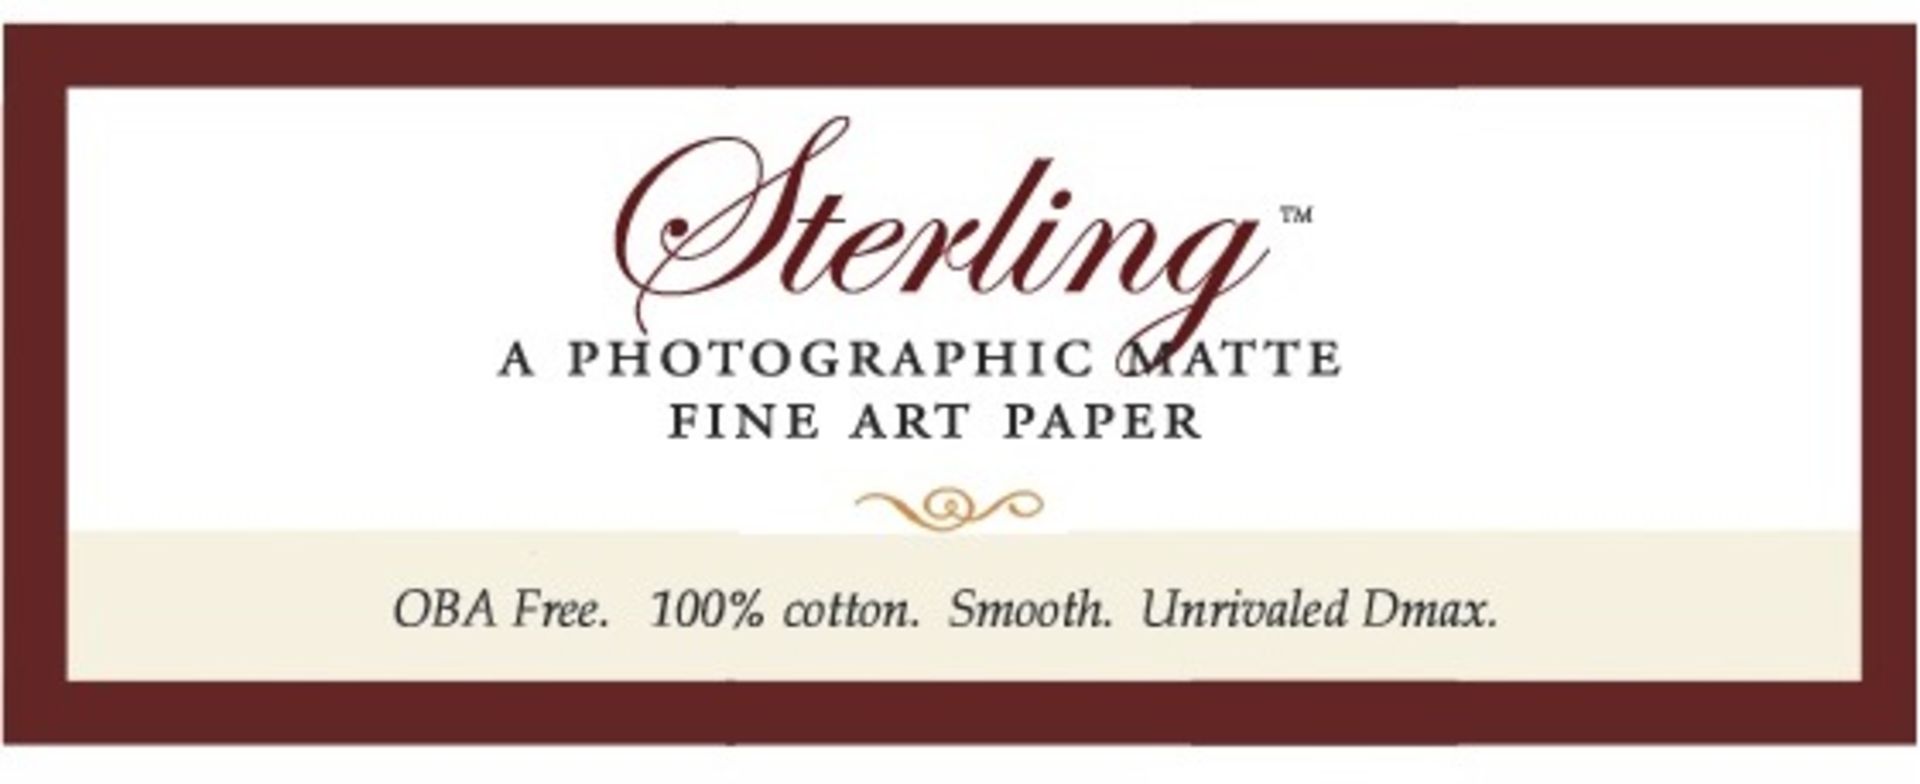 1 x Roll of Breathing Colour STERLING Photographic Matte Fine Art Paper - Size 24" x 40' - 320gsm - - Image 4 of 4